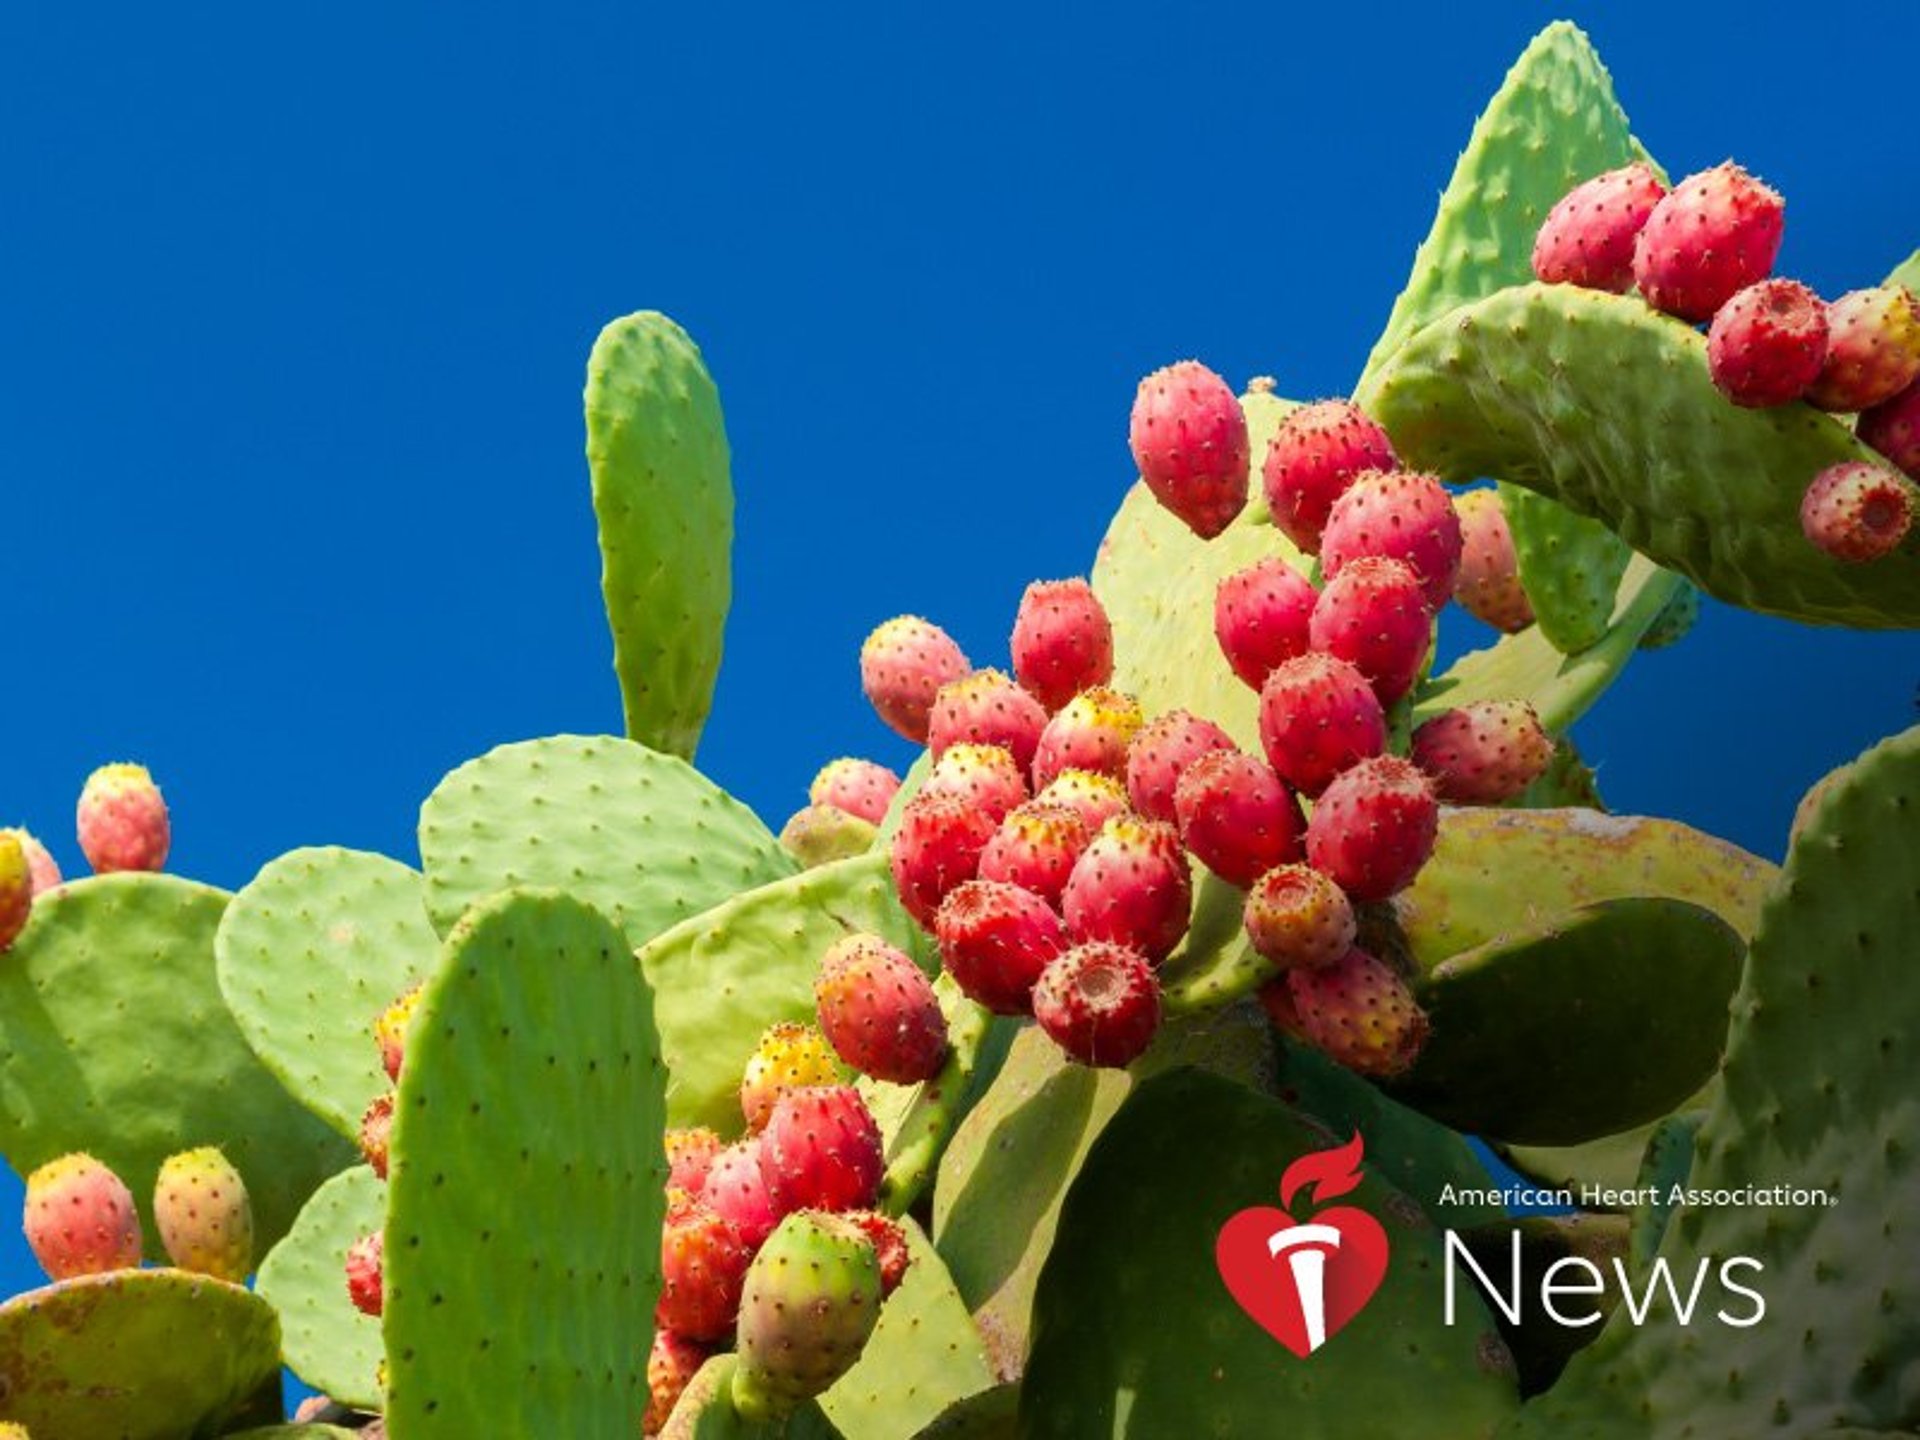 News Picture: AHA News: Get Past Its Spines and Reap Health Benefits From the Prickly Pear Cactus